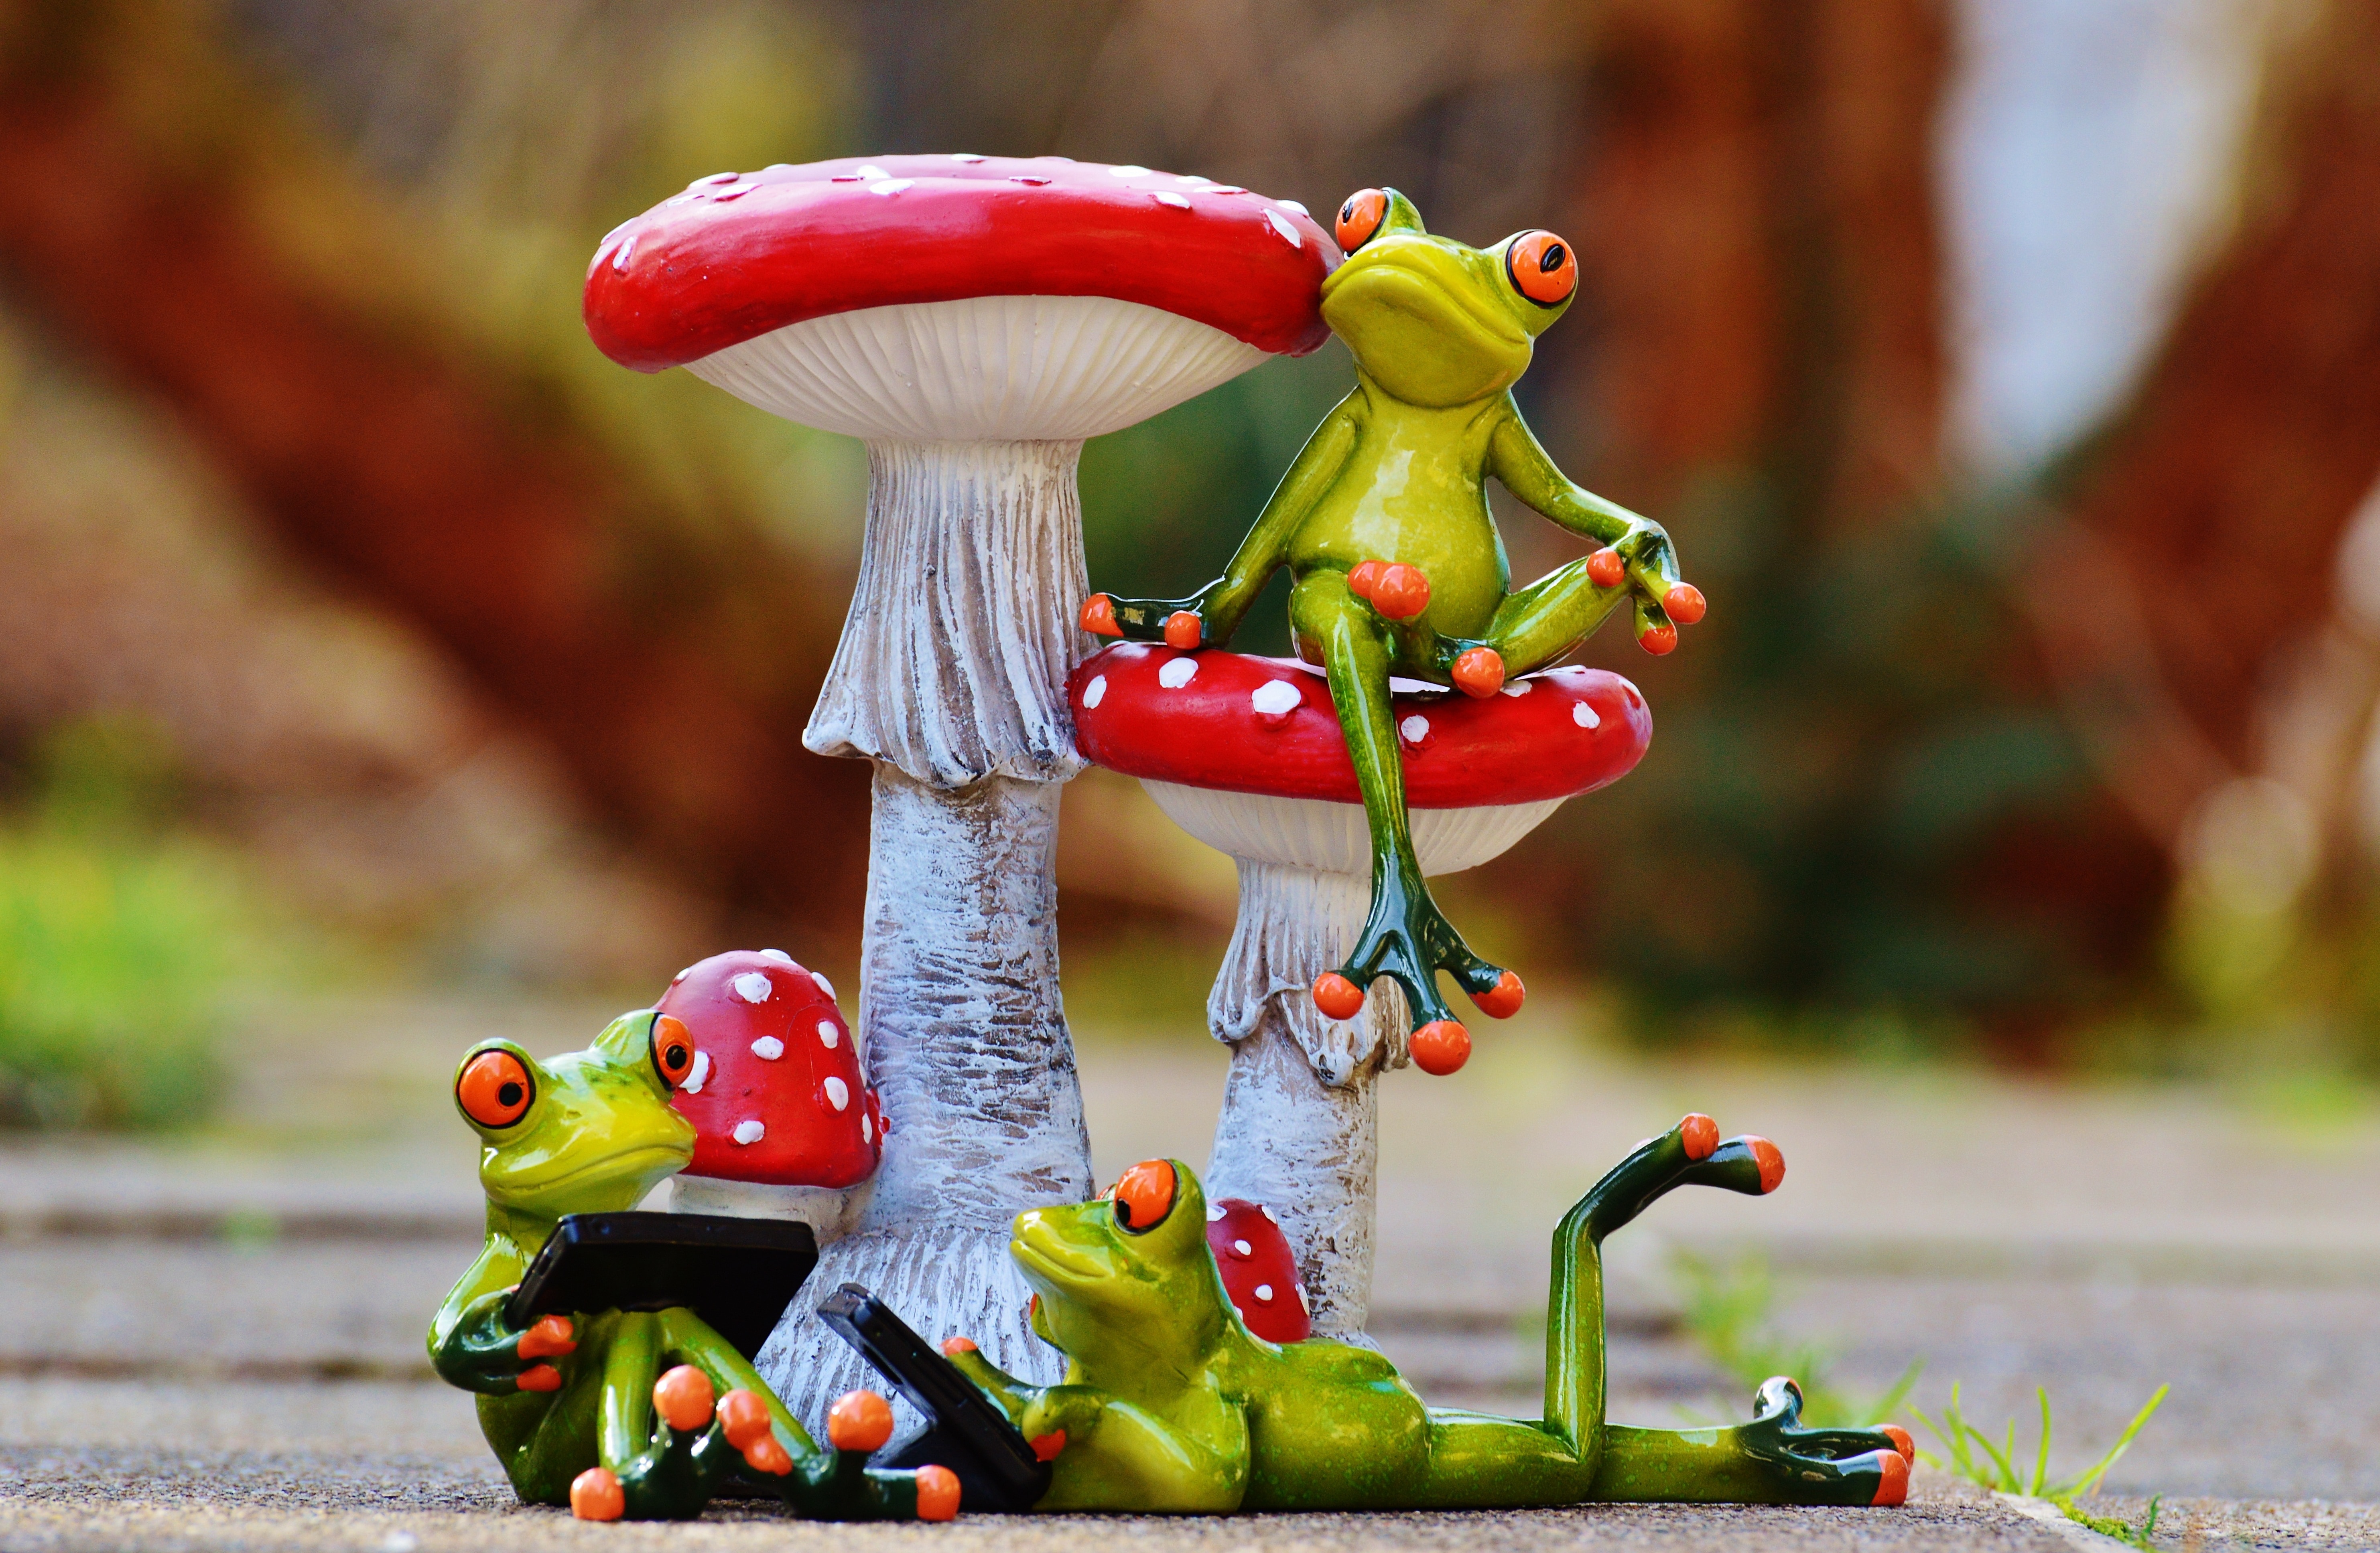 Figures, Cute, Funny, Frogs, Mushrooms, focus on foreground, red